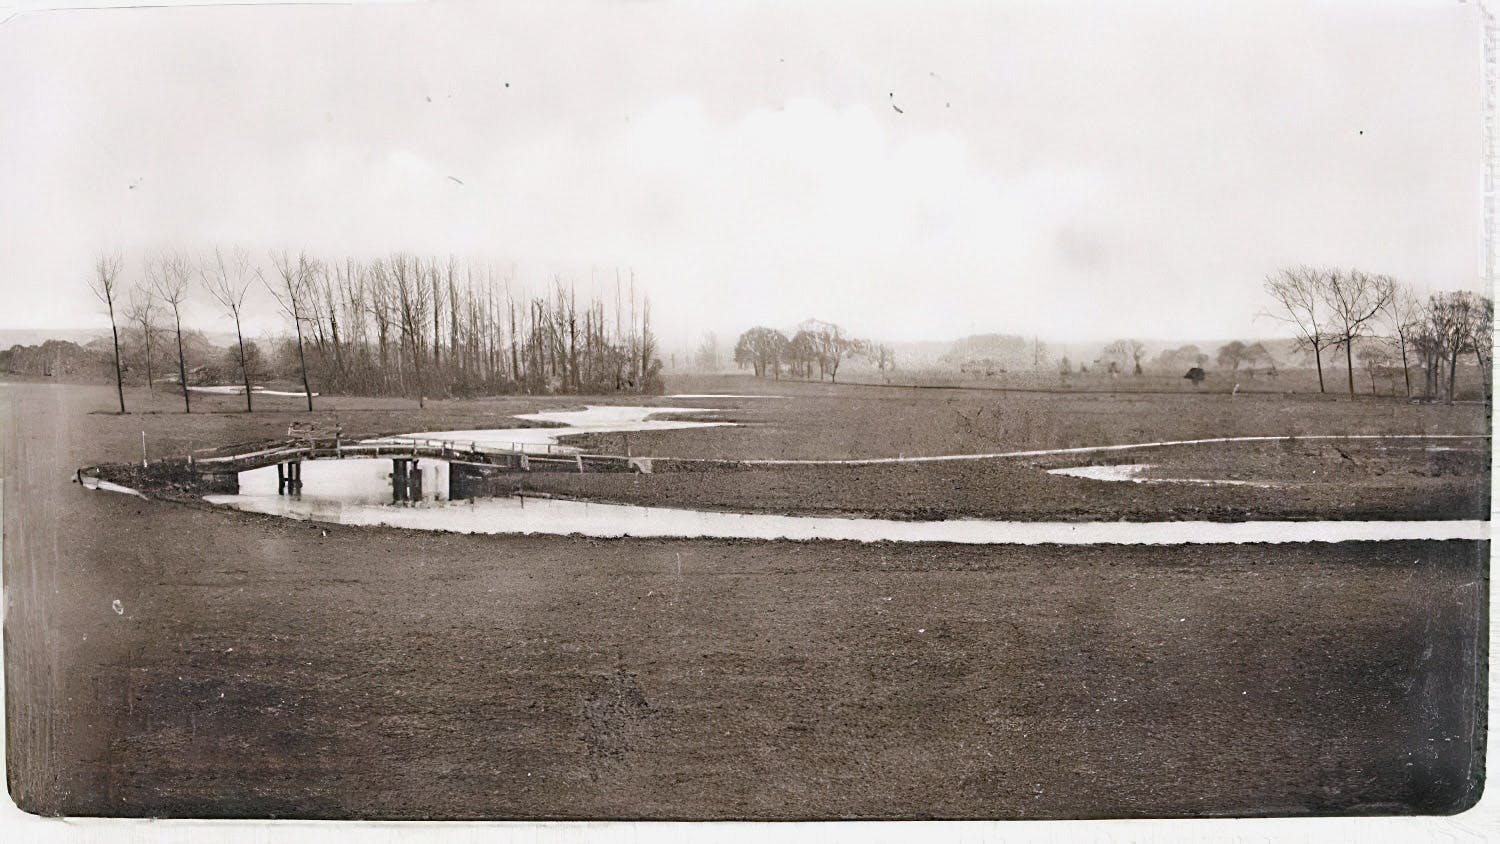 A pre-WW1 view of the bridge taken looking downstream along ‘The Reach’ from the vicinity of Friars Meadow.The photo brings out the meandering nature of the old river course, often the cause of flooding in the low-lying parts of the town. The channel was straightened and meanders cut through after WW2. Before that I the bridge led directly onto the Essex bank, not as today onto an island.